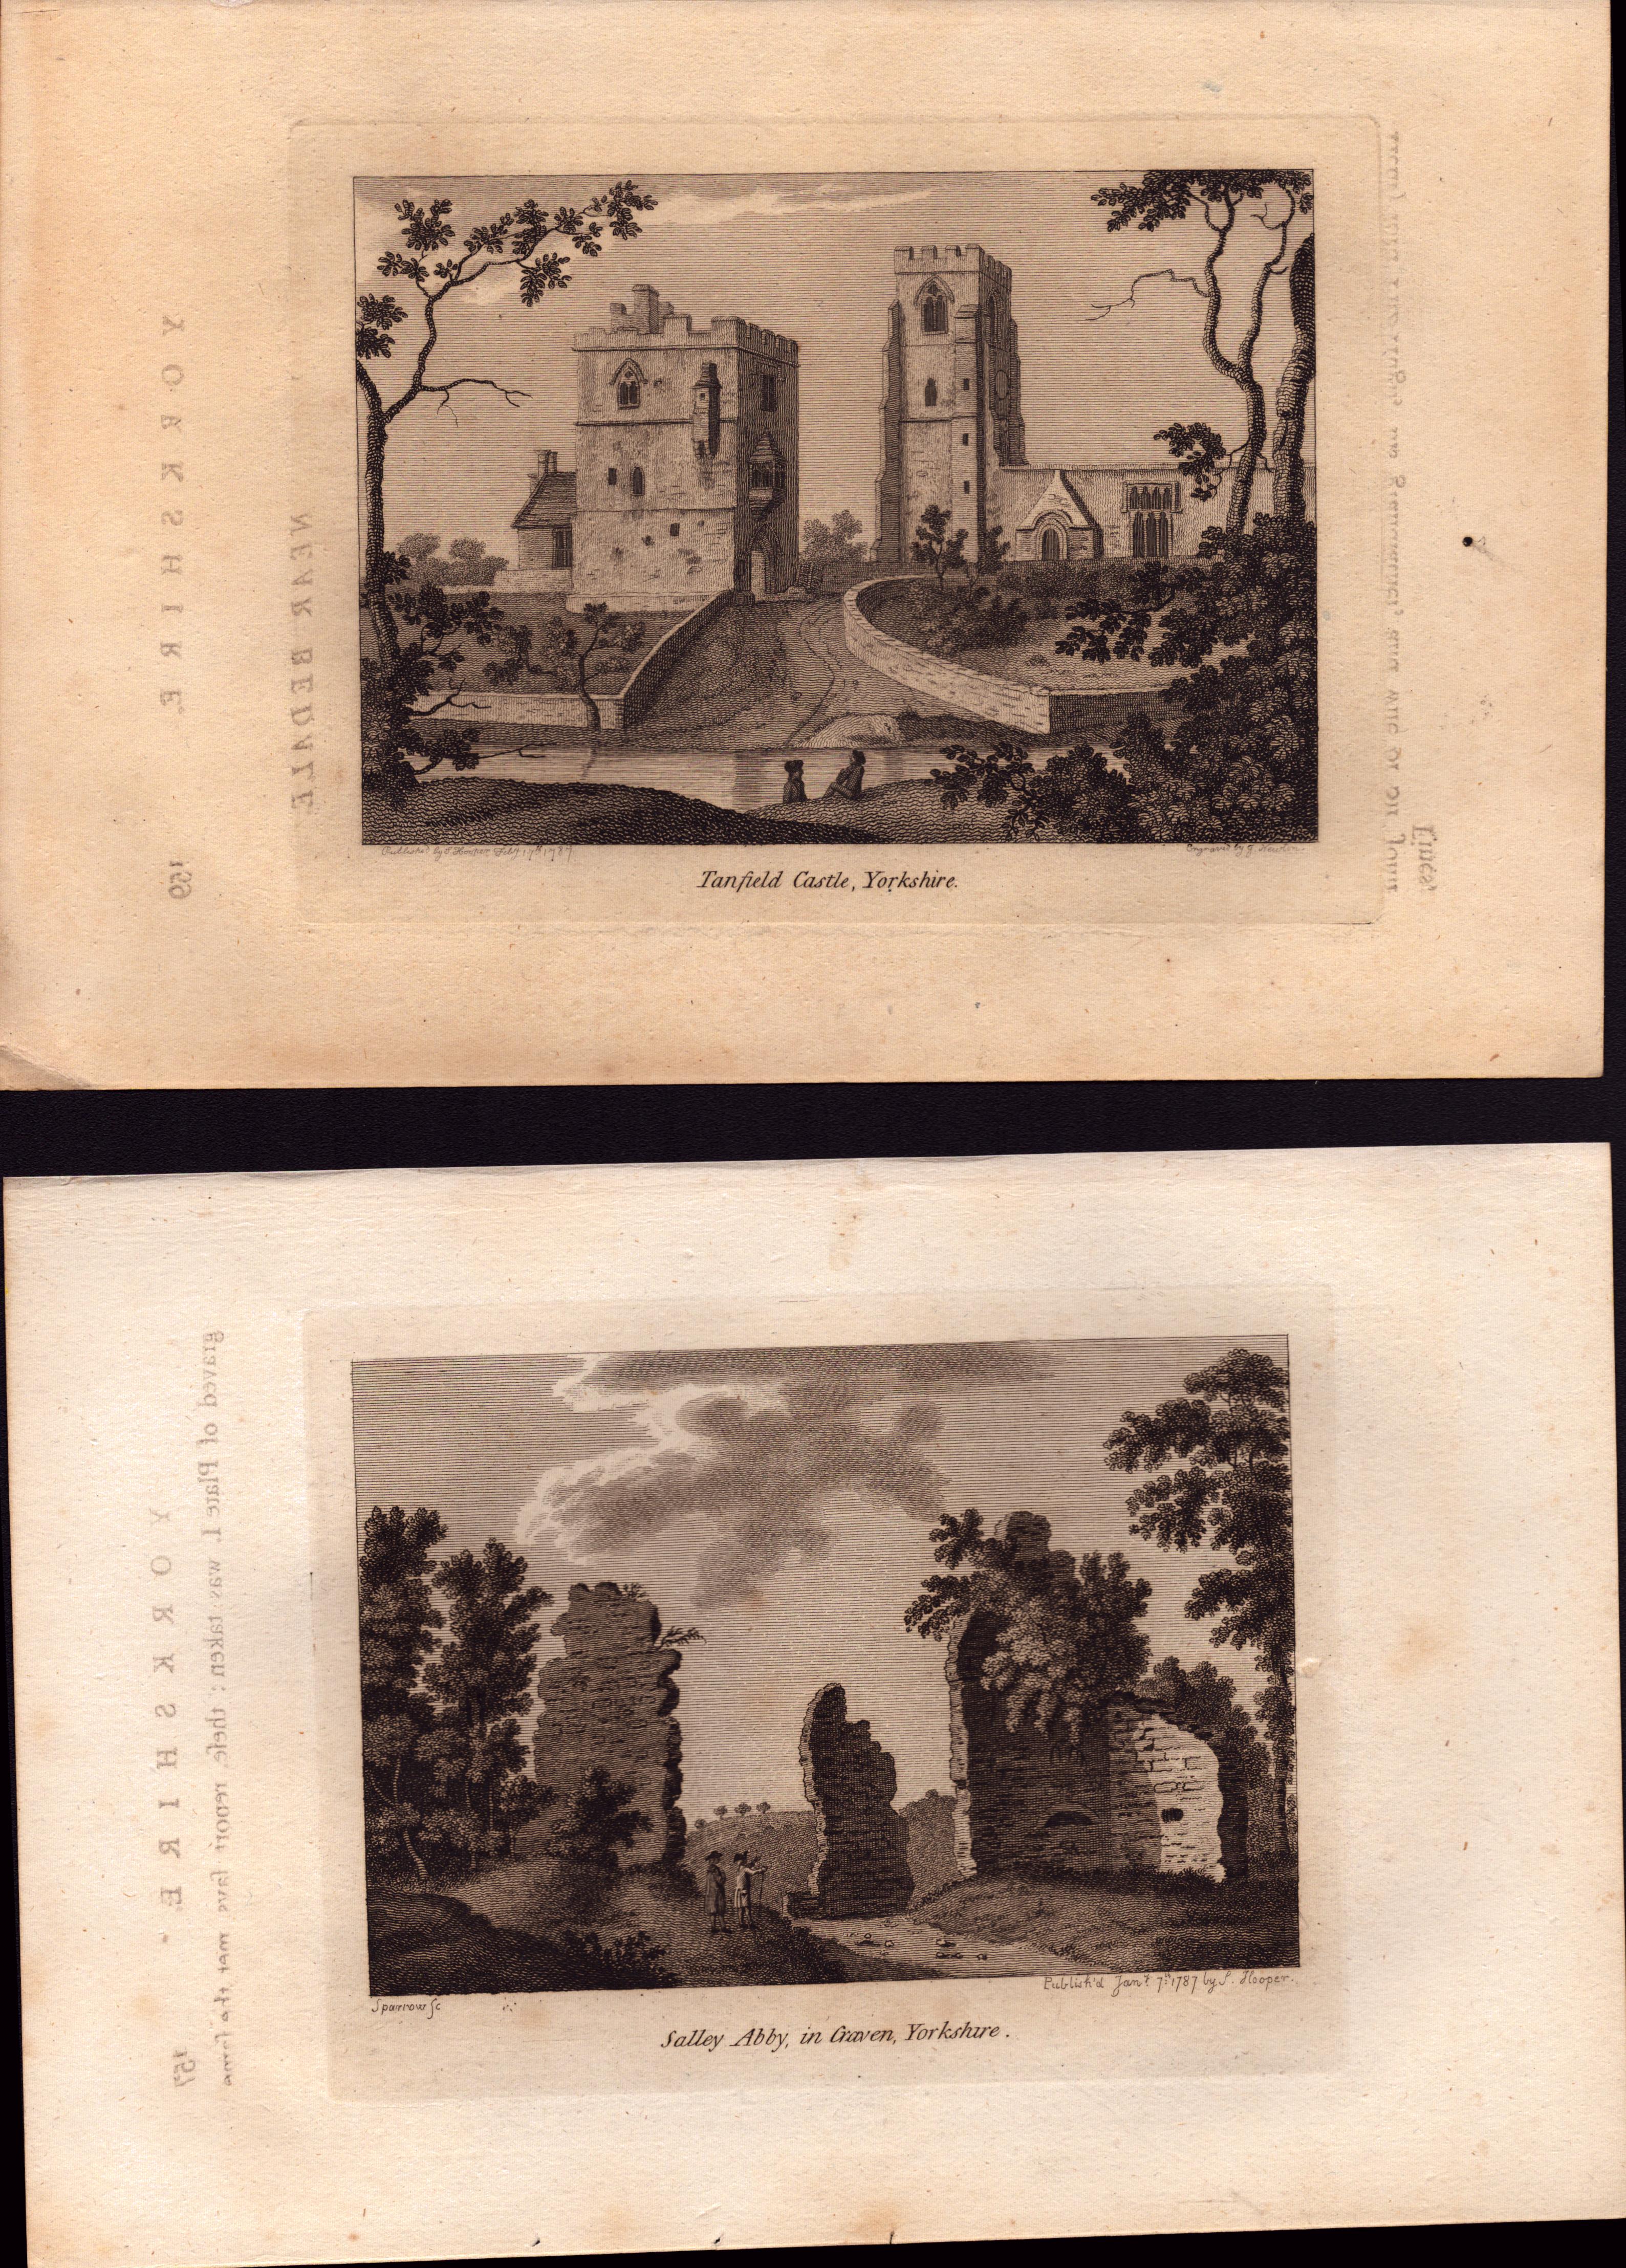 Job Lot Yorkshire Grose Antique 230+ Years Old 1783 Copper Engraving-1. - Image 3 of 6